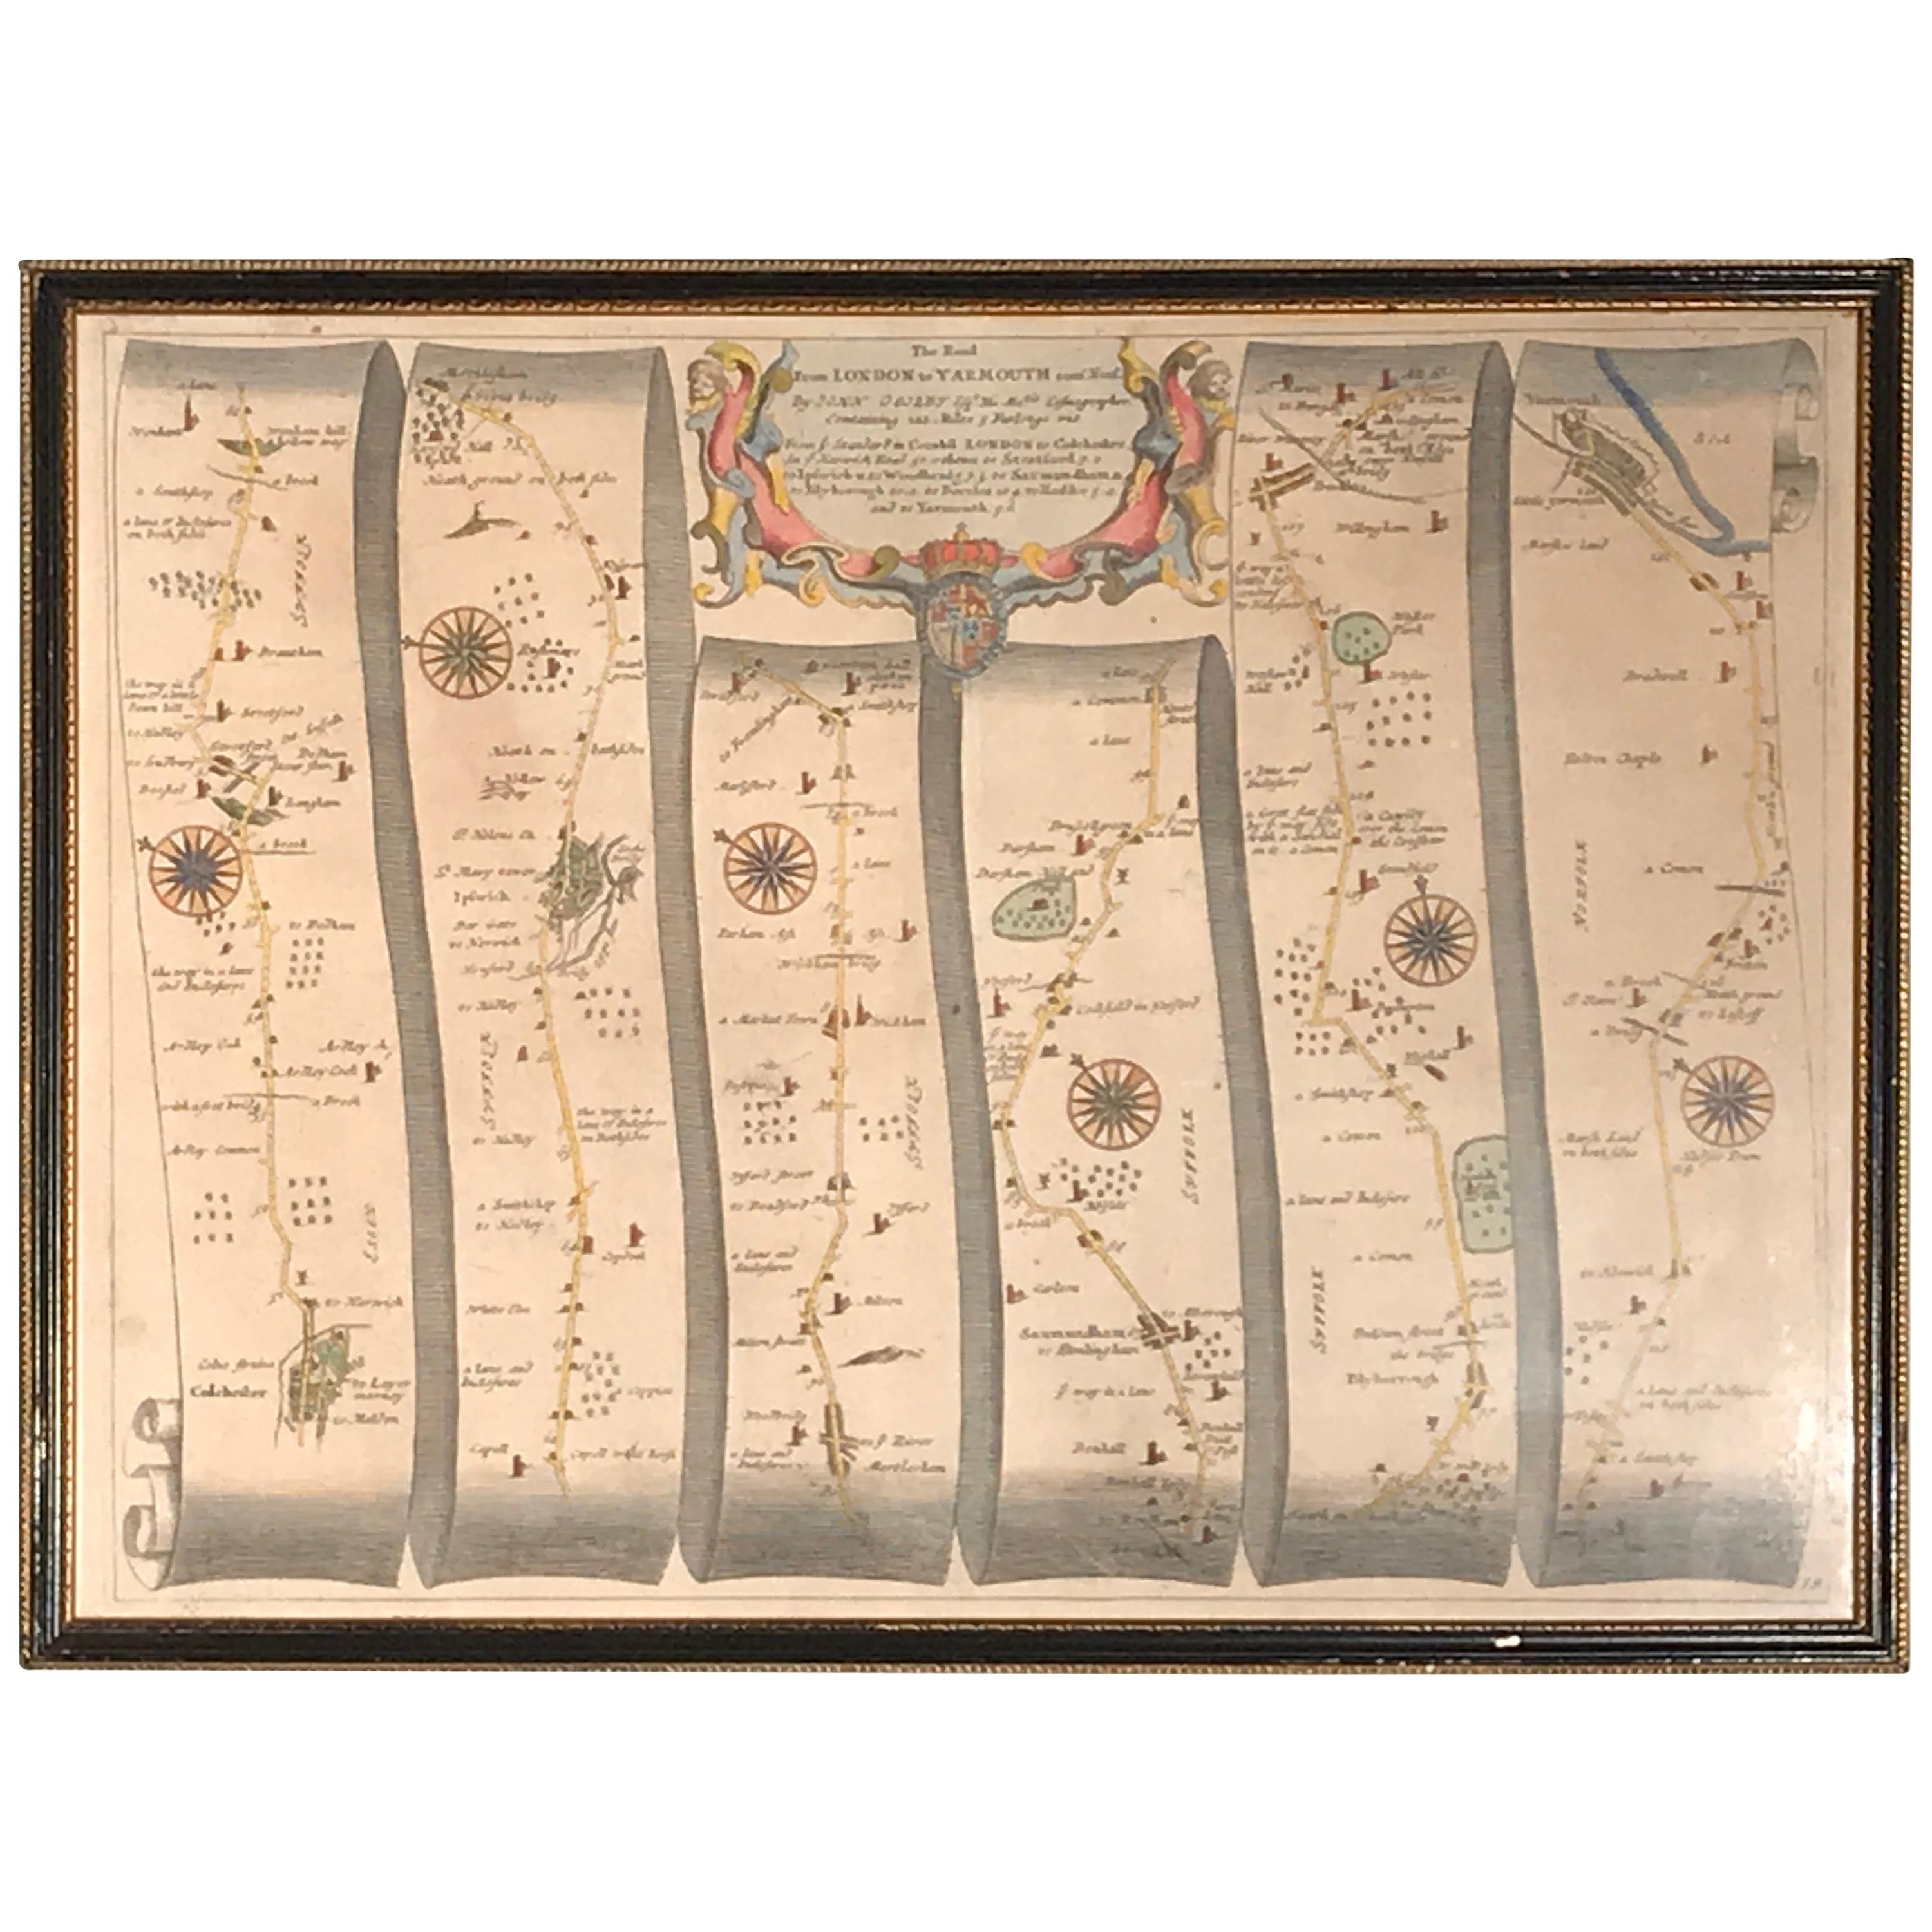 Replica 17c OGILBY  Old Road Map Dorking London to Arundel Chichester inc 